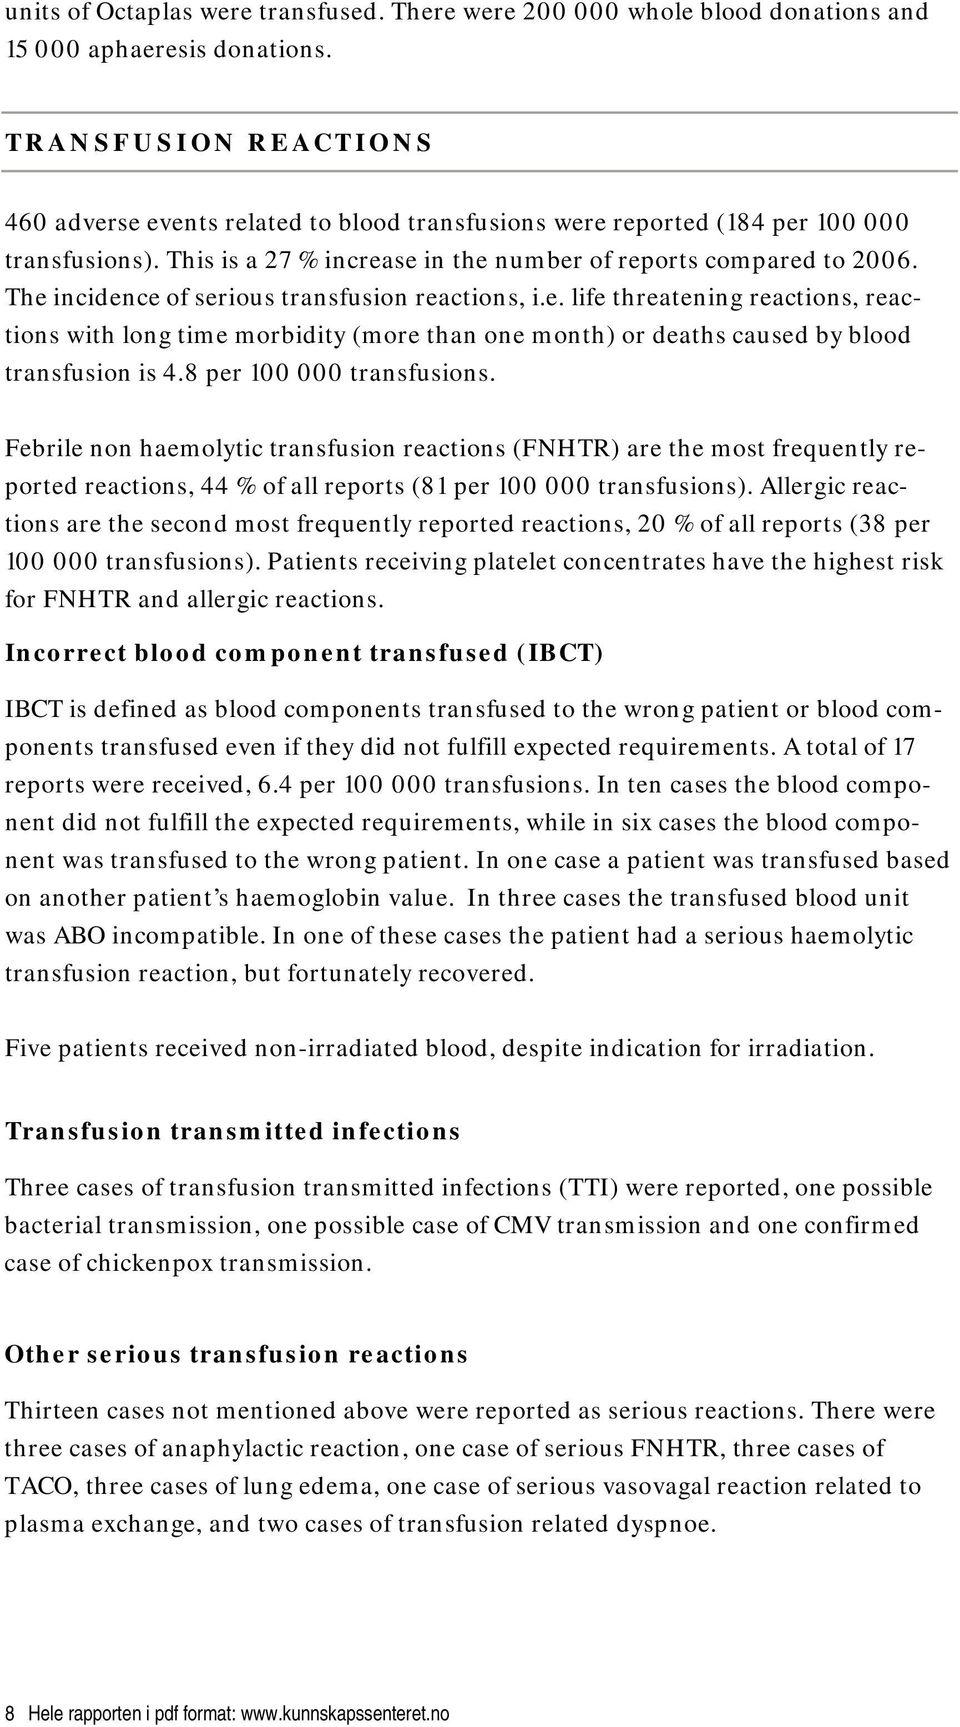 The incidence of serious transfusion reactions, i.e. life threatening reactions, reactions with long time morbidity (more than one month) or deaths caused by blood transfusion is 4.